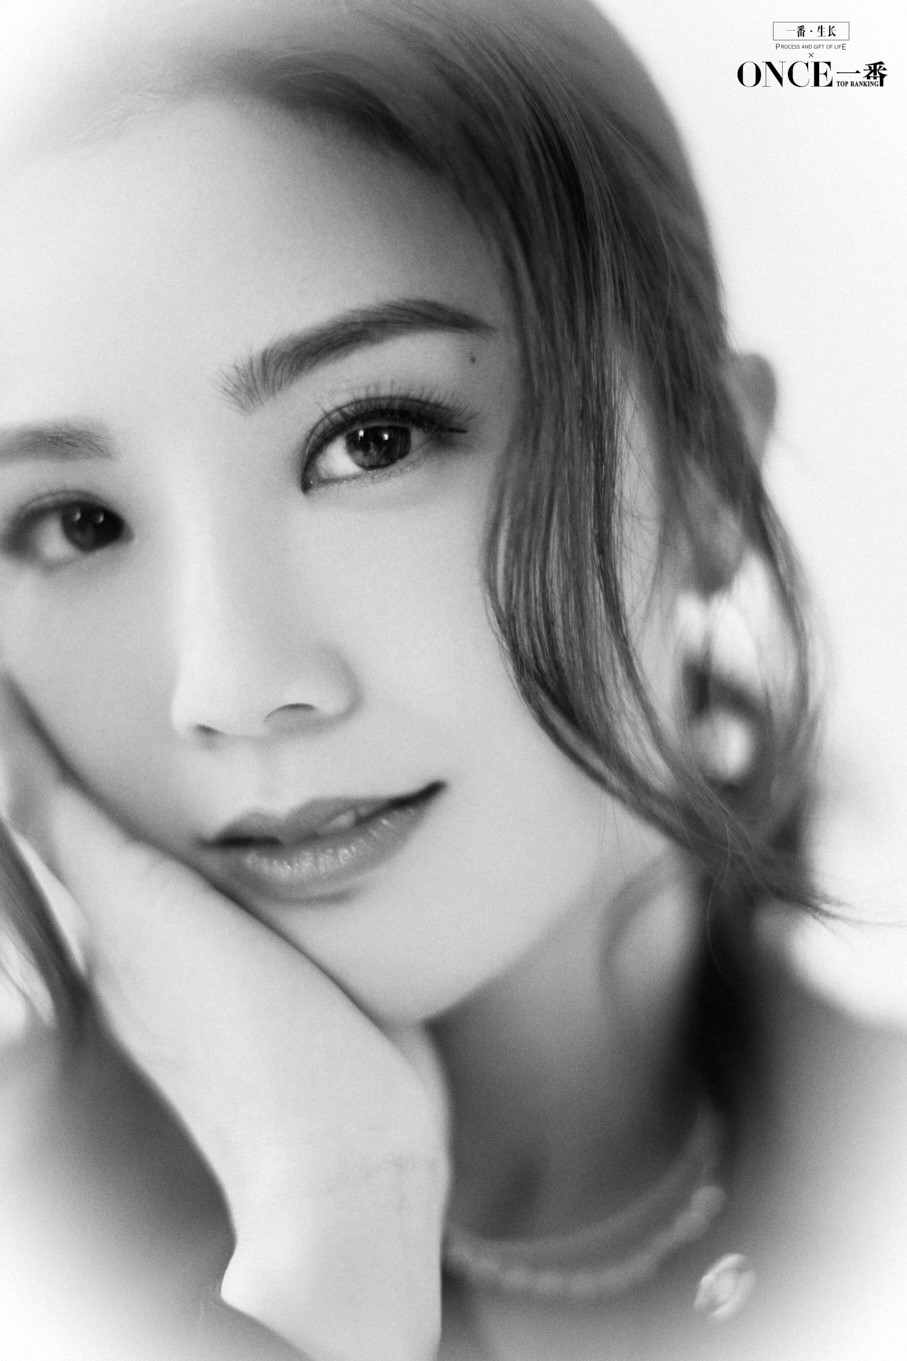 A Sa Charlene Choi brings her new work to the cover of 